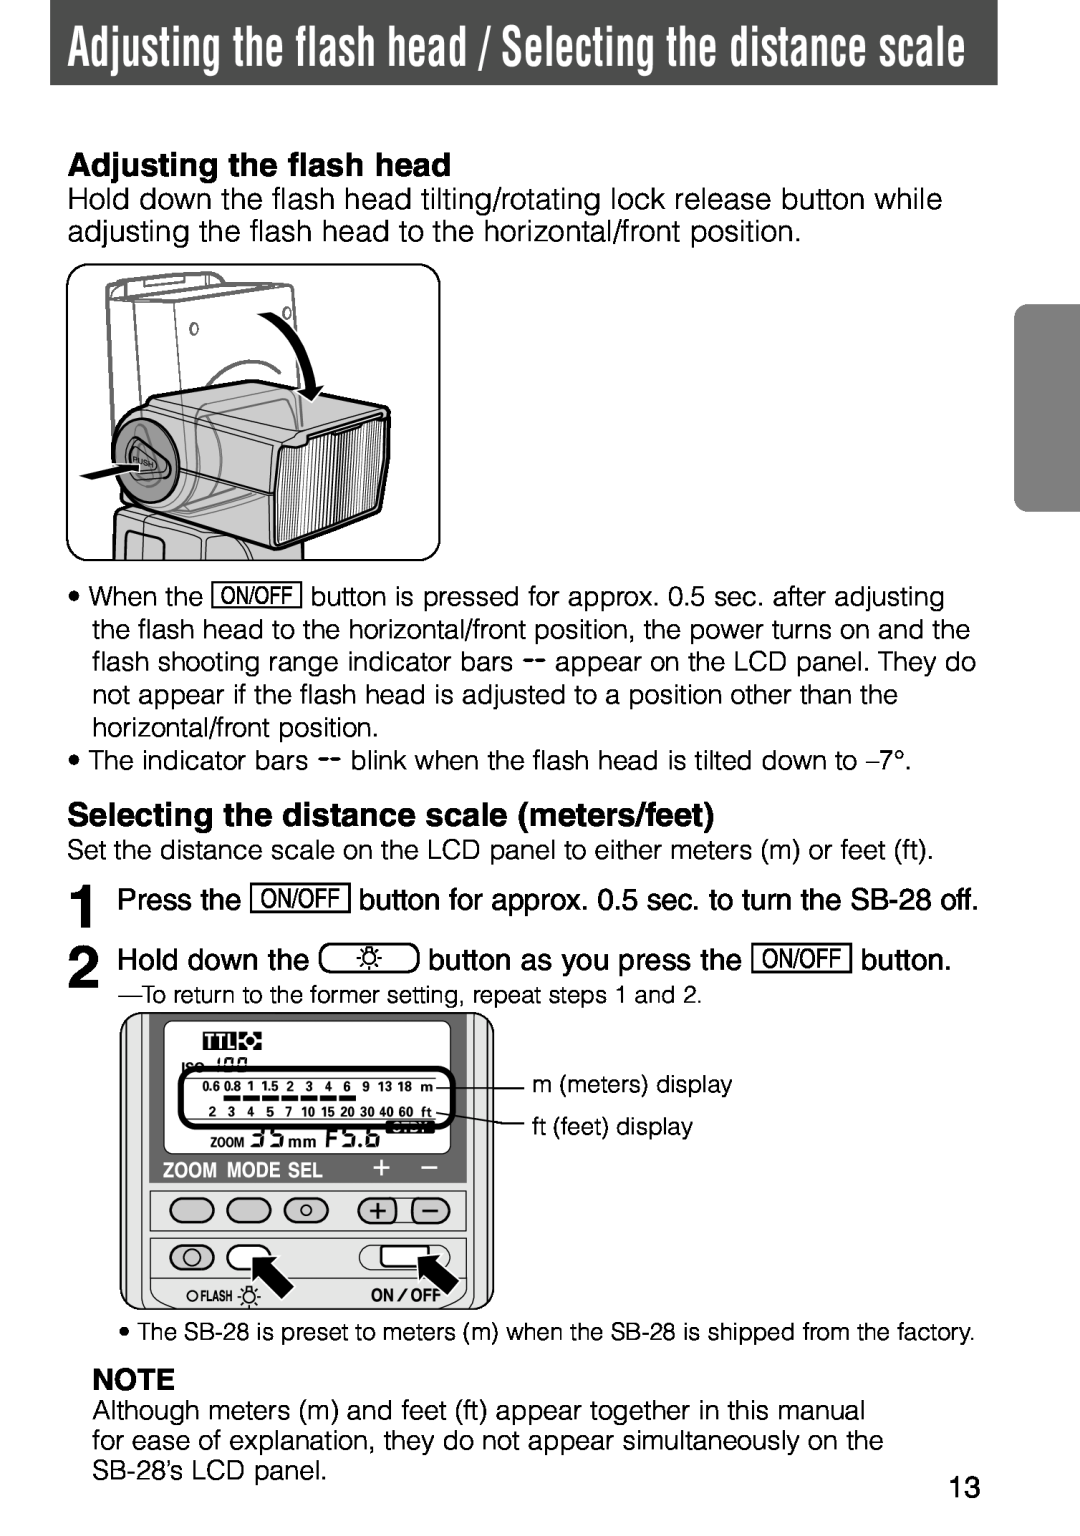 Nikon SB-28 instruction manual Adjusting the flash head, Selecting the distance scale meters/feet 